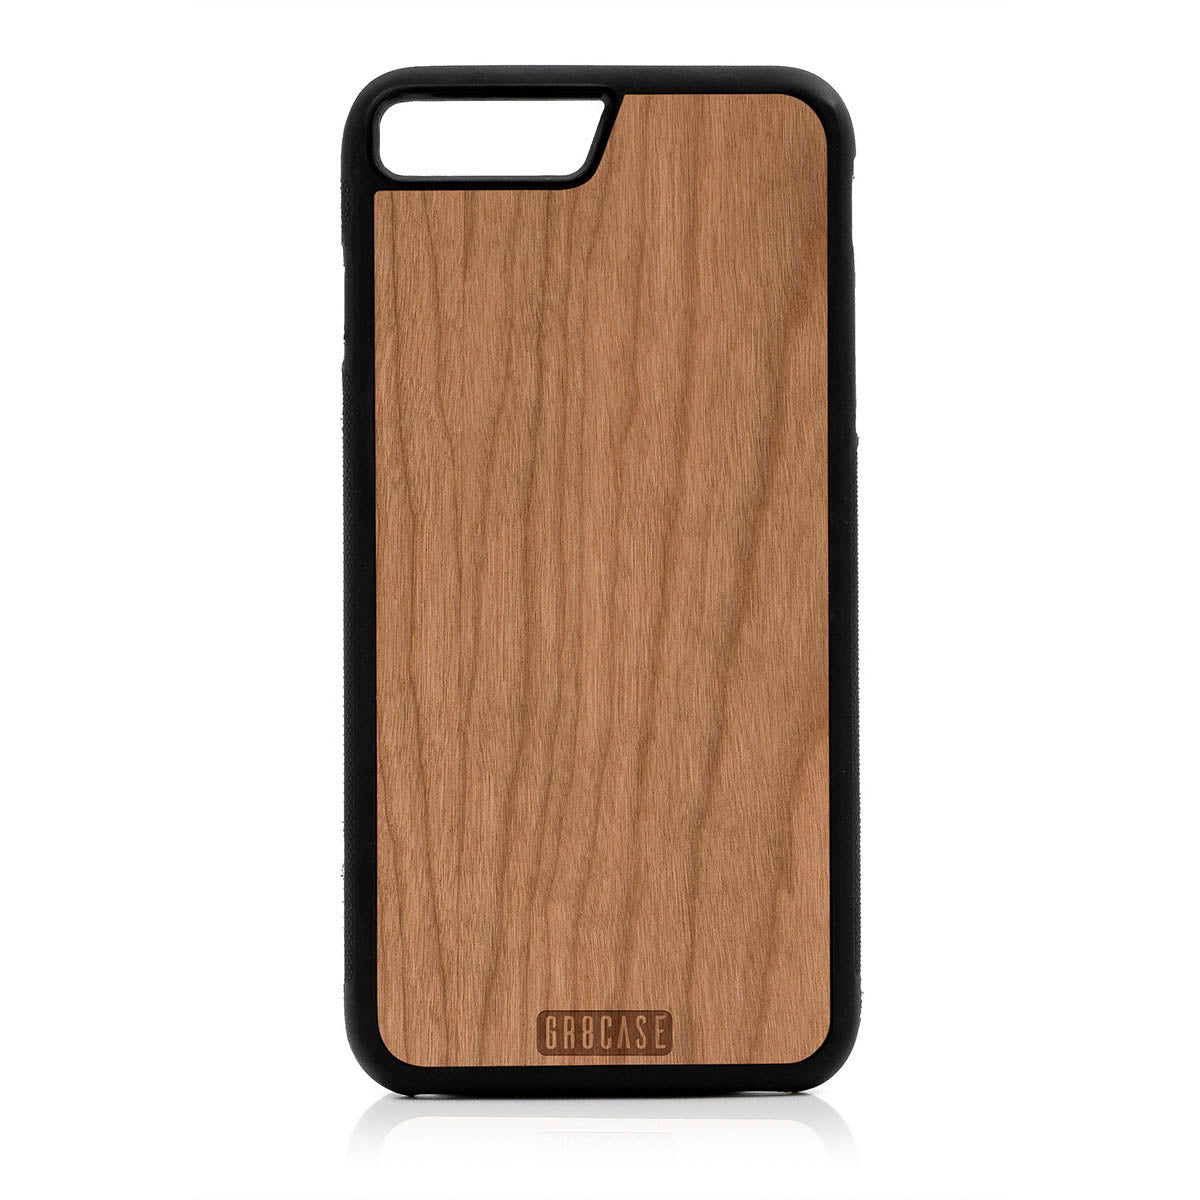 Classic Solid Wood Panel Inlay Case For iPhone 7 Plus / 8 Plus by GR8CASE